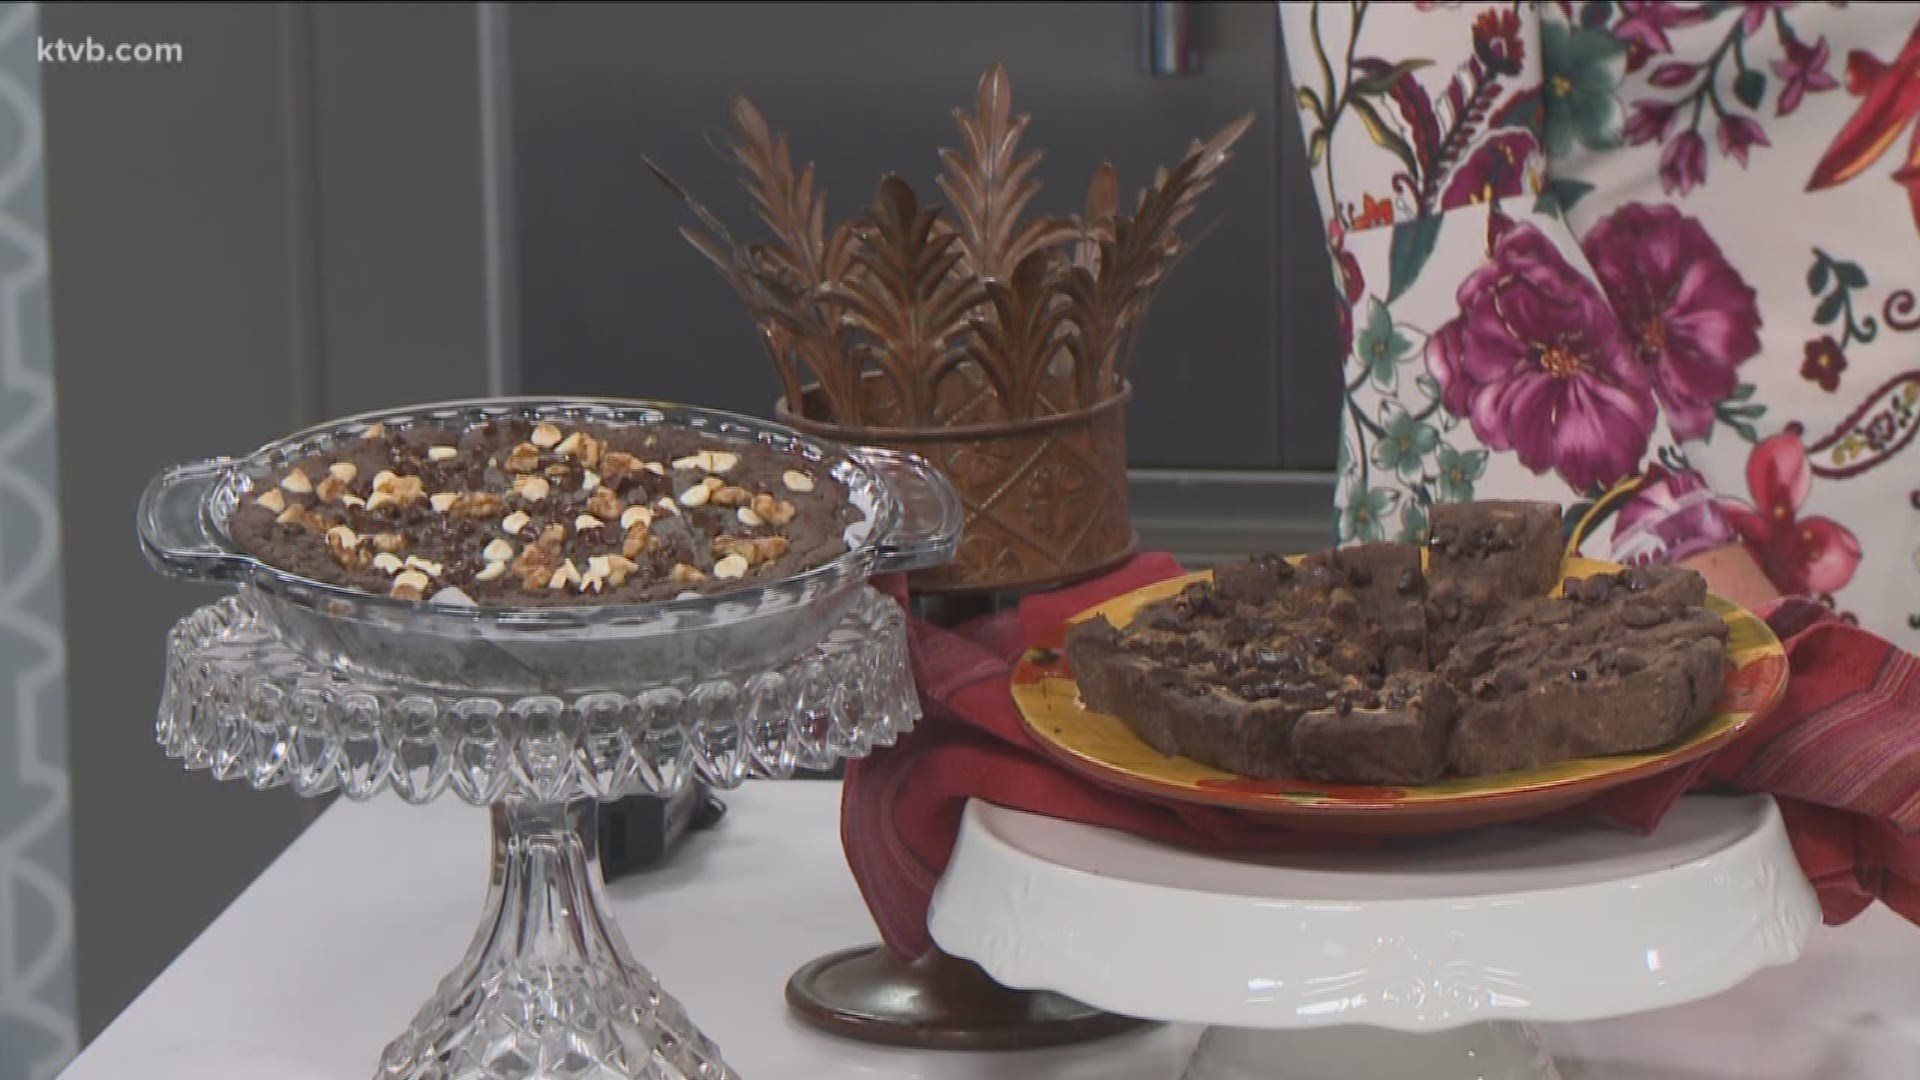 Pohley Richey from Boise Urban Garden School shows how to make this fall dessert.